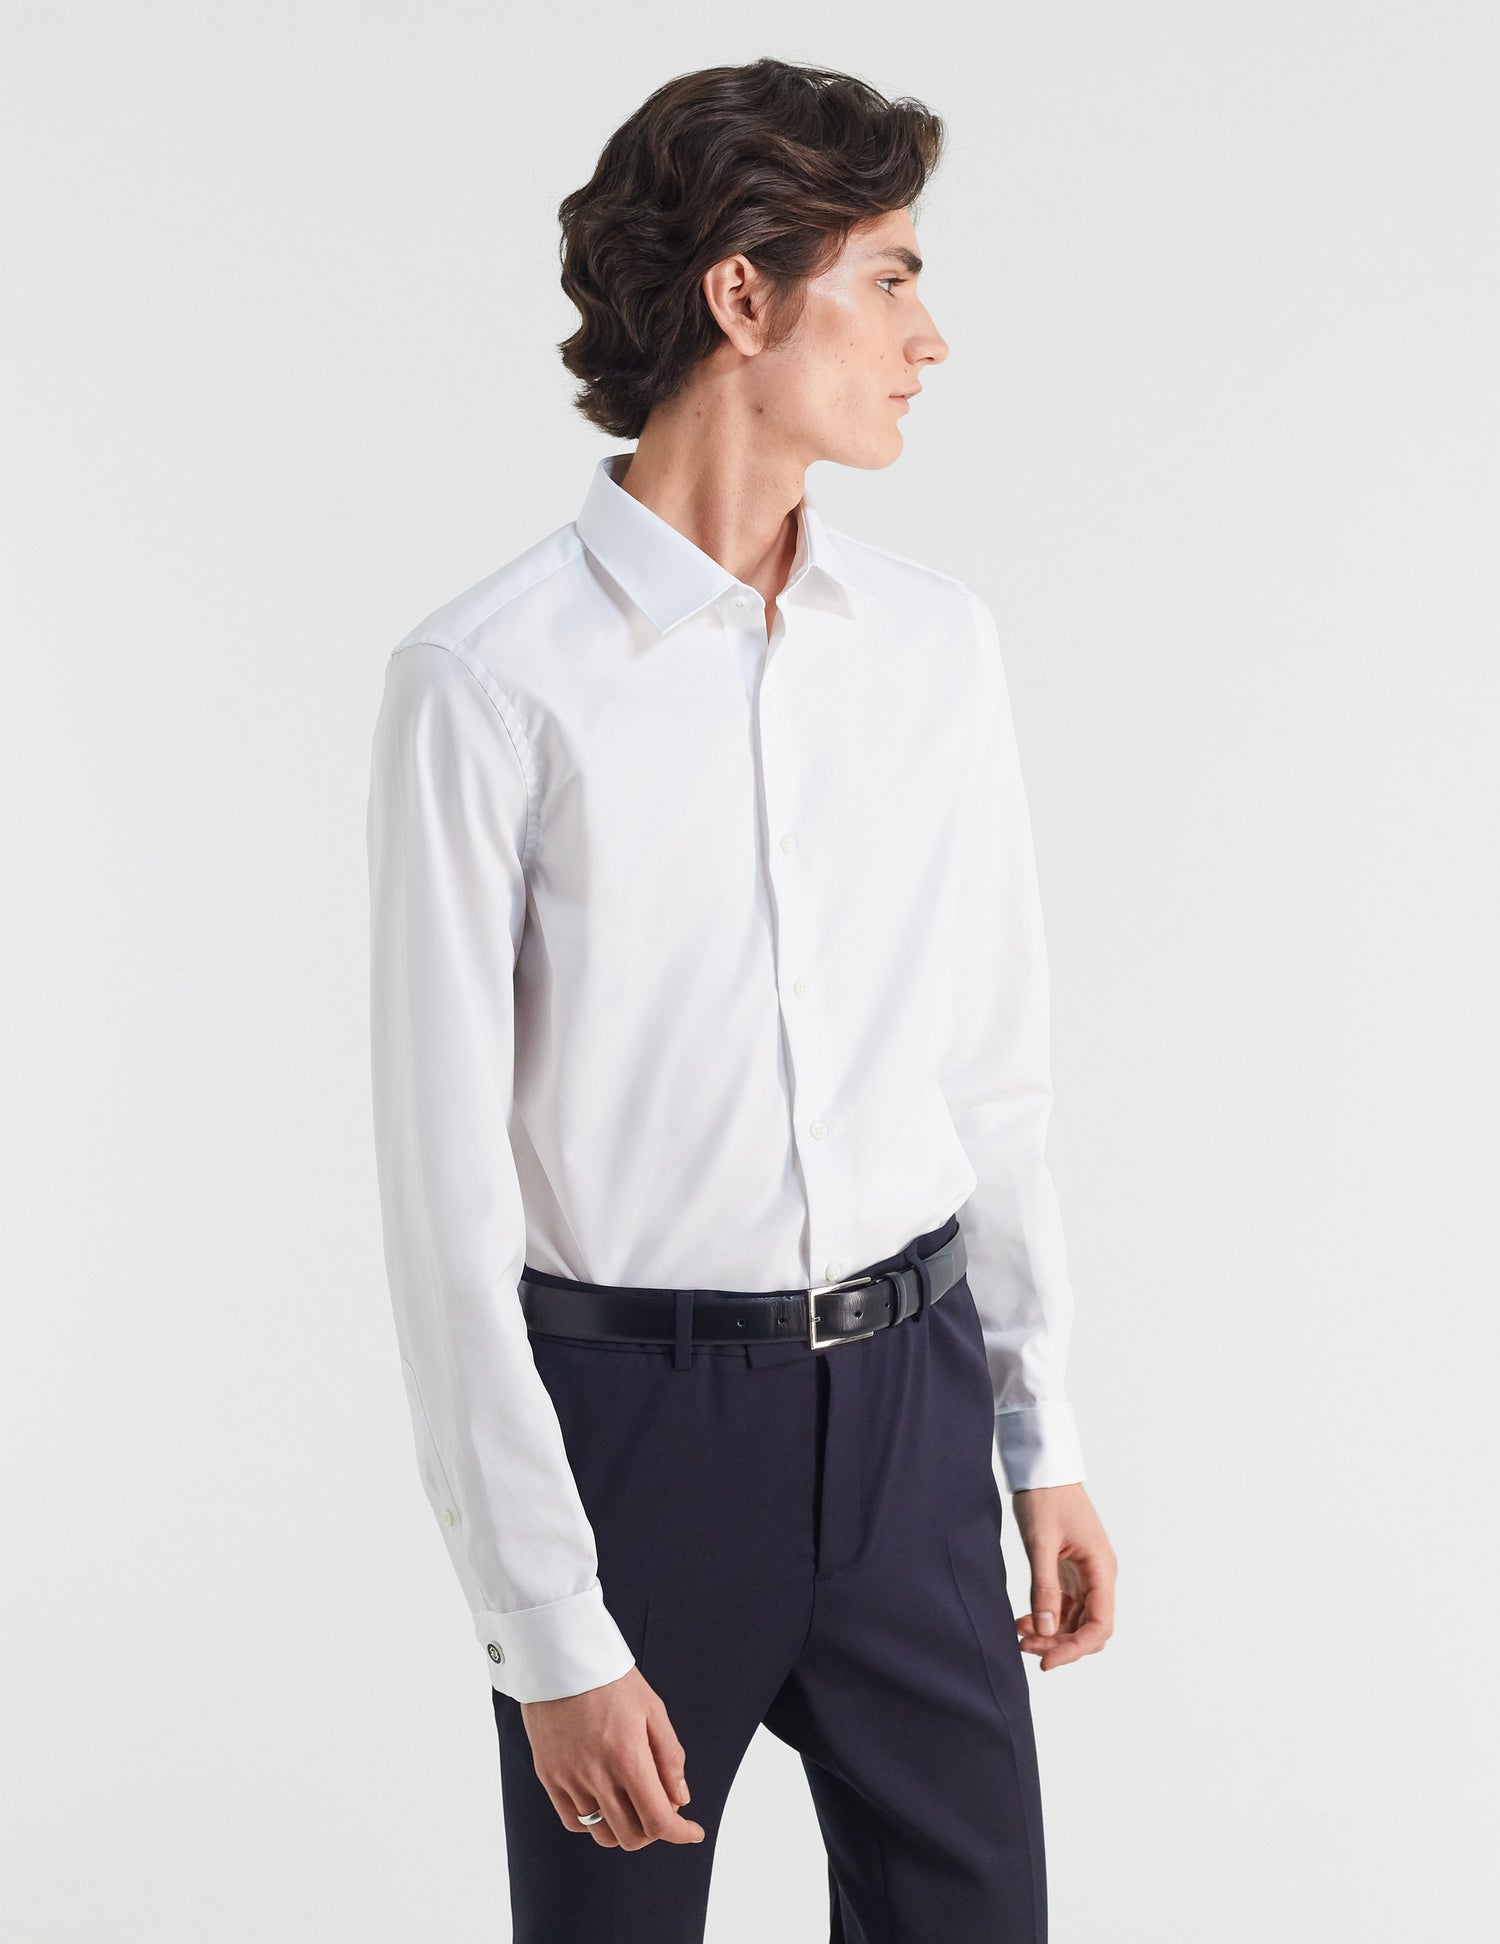 Semi-fitted white shirt - Poplin - Figaret Collar - French Cuffs#3